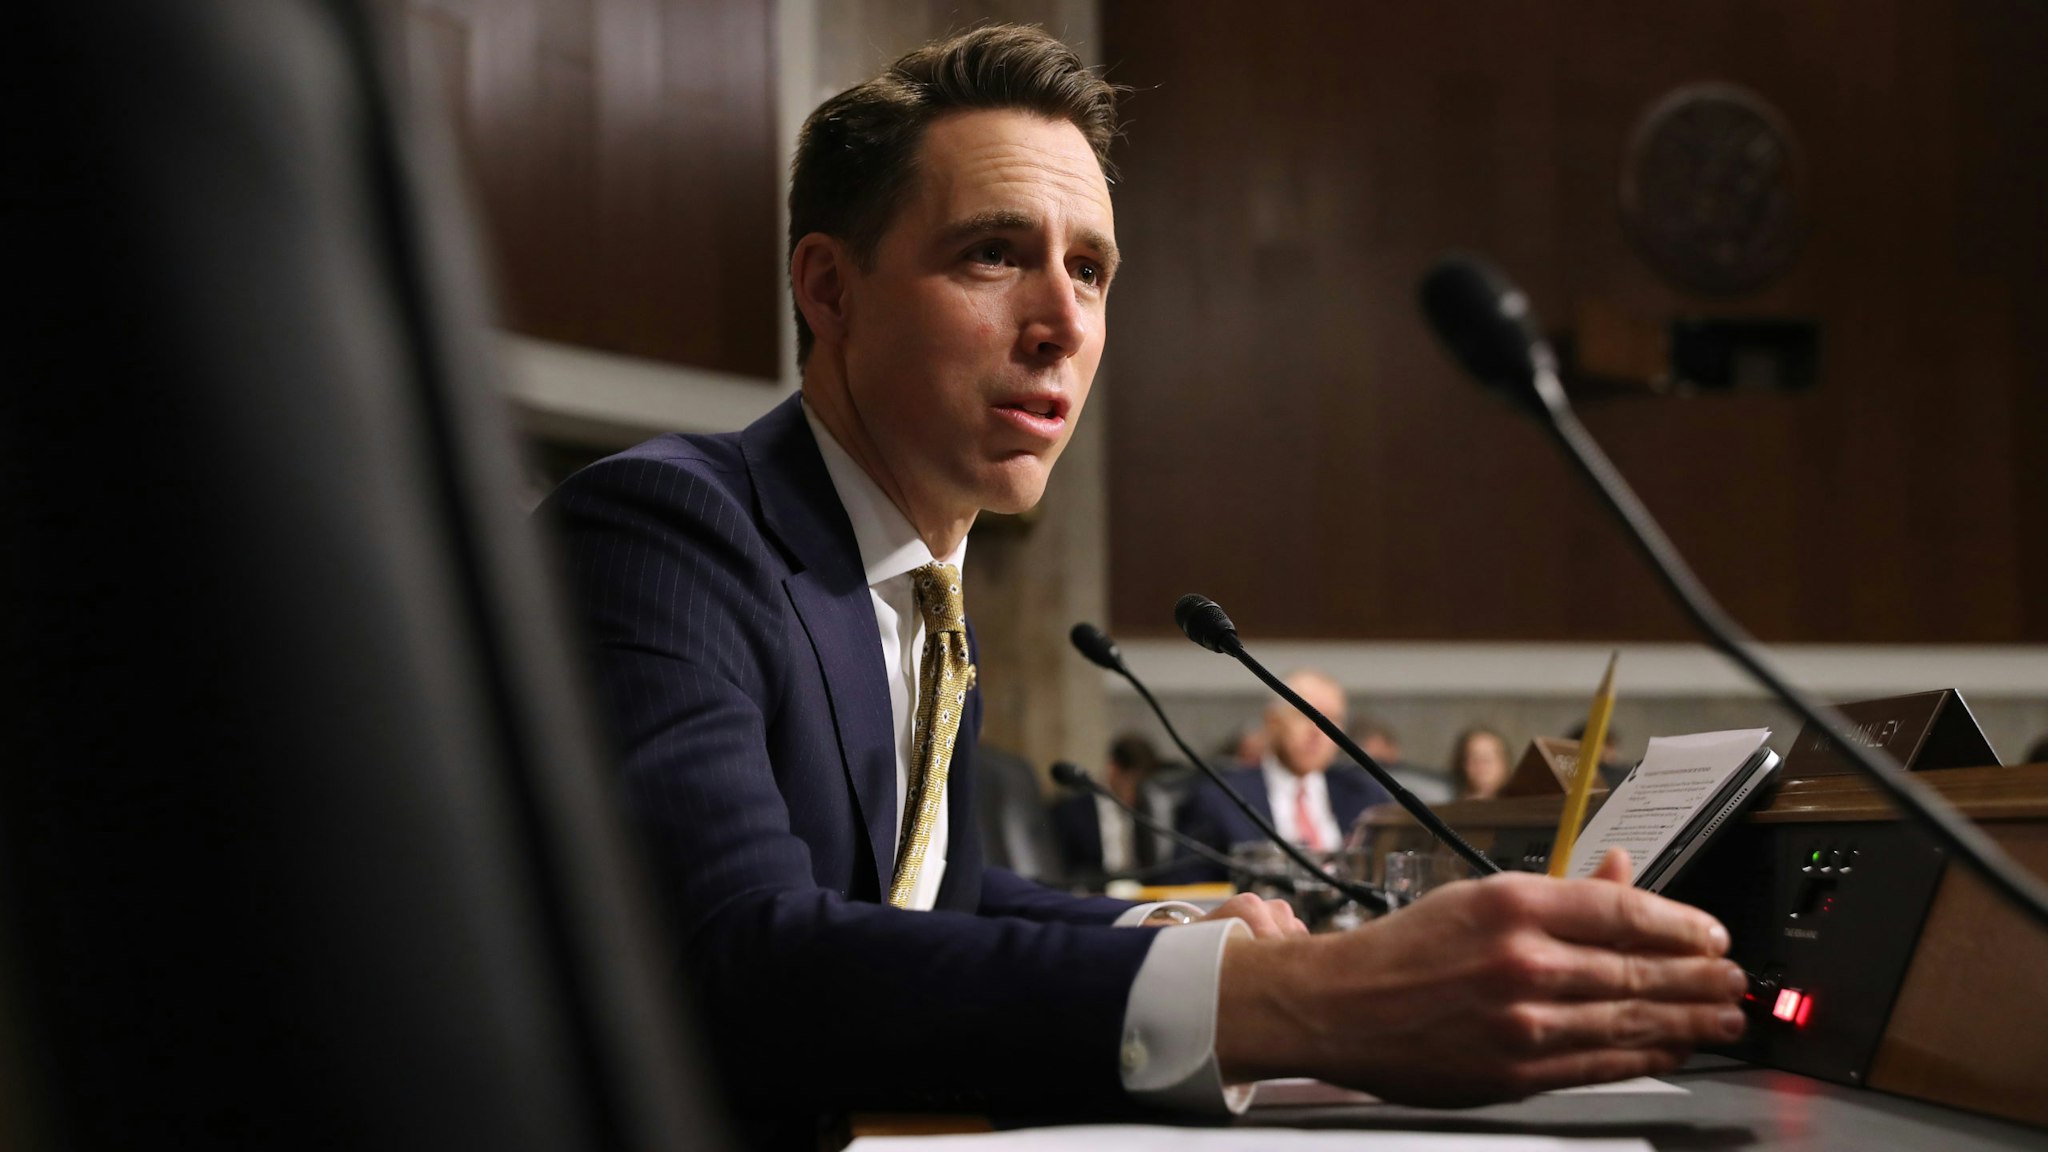 WASHINGTON, DC - DECEMBER 03: Senate Armed Services Committee member Sen. Josh Hawley (R-OM) questions witnesses during a hearing in the Dirksen Senate Office Building on Capitol Hill December 03, 2019 in Washington, DC. Military secretaries and members of the Joint Chiefs testified about a new GAO report about ongoing reports of substandard military housing conditions and services.